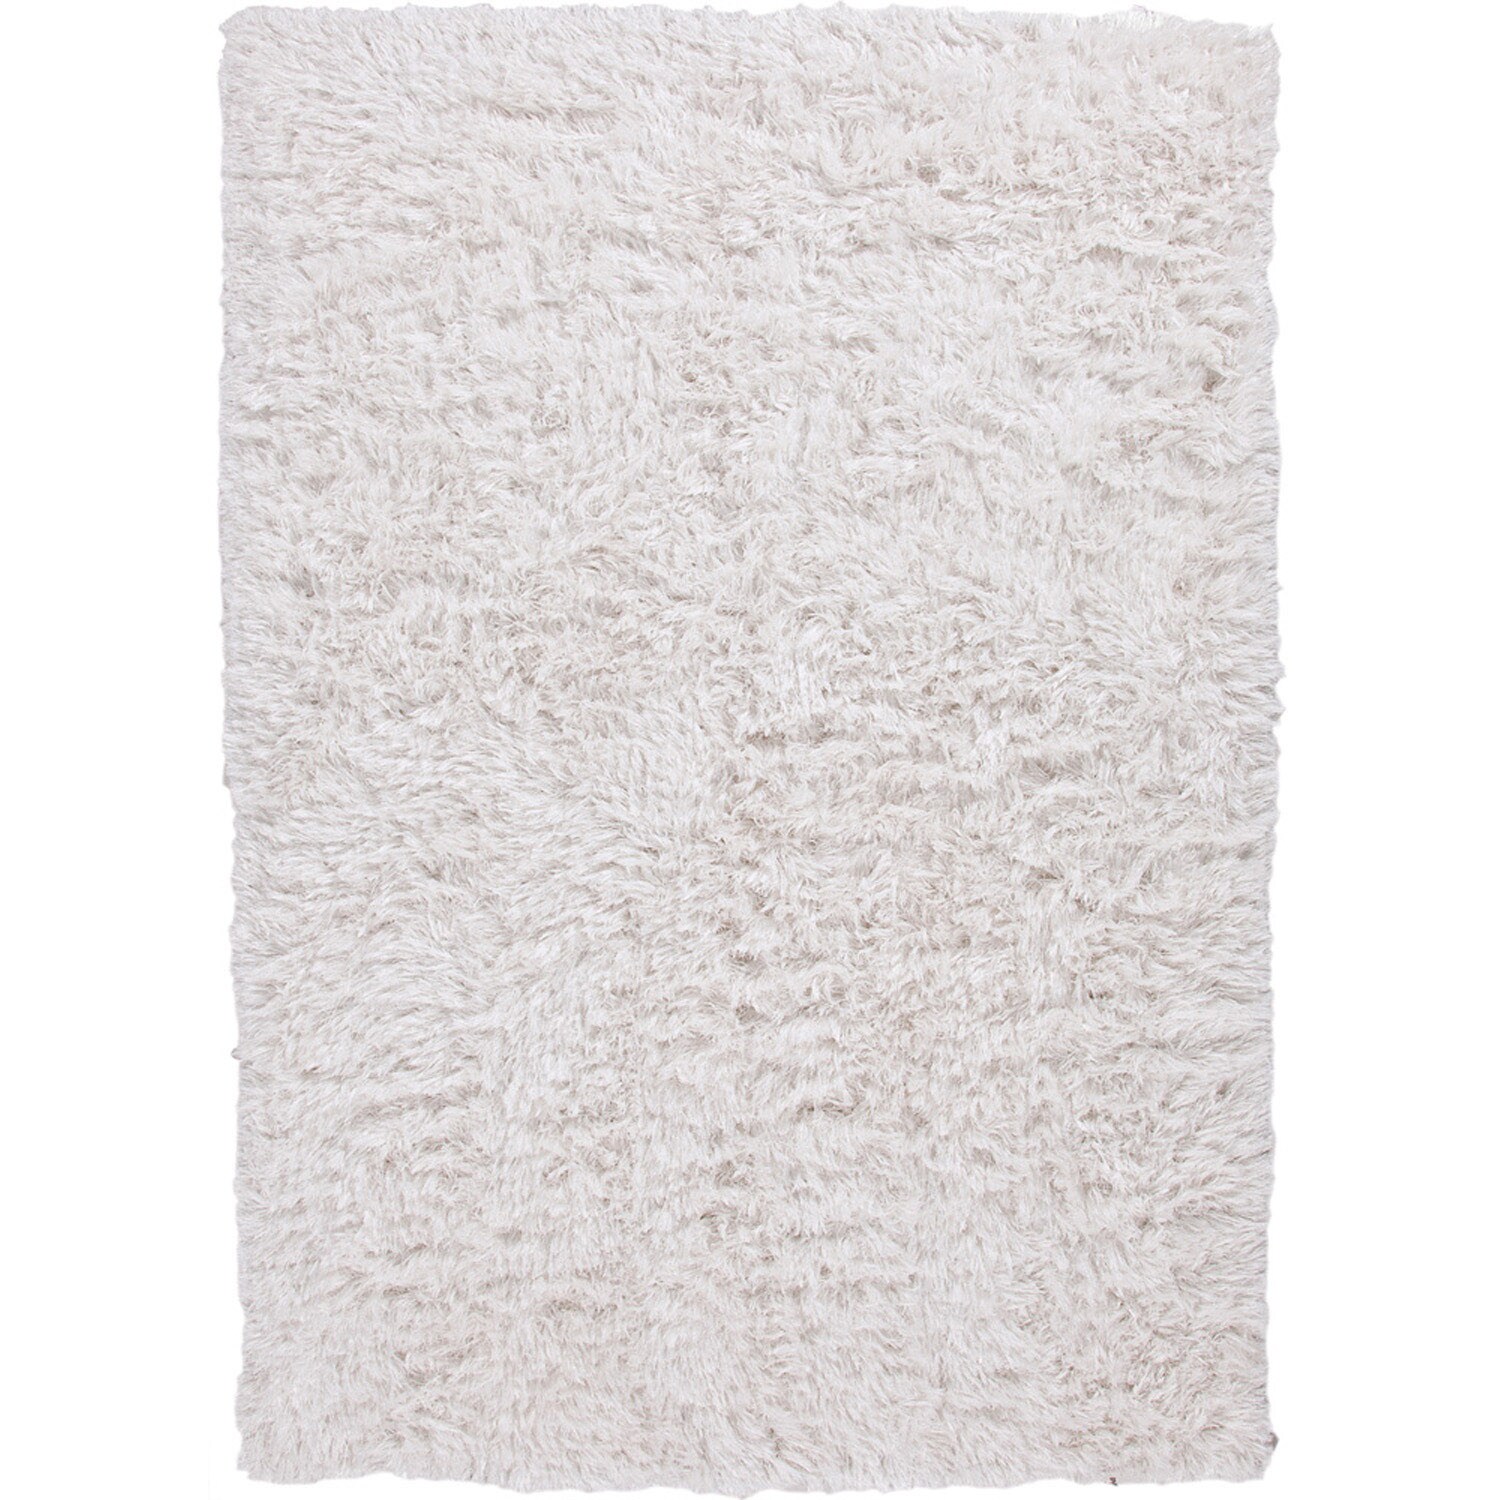 Ivory Handwoven Shags Solid pattern Area Rug (8 X 10)